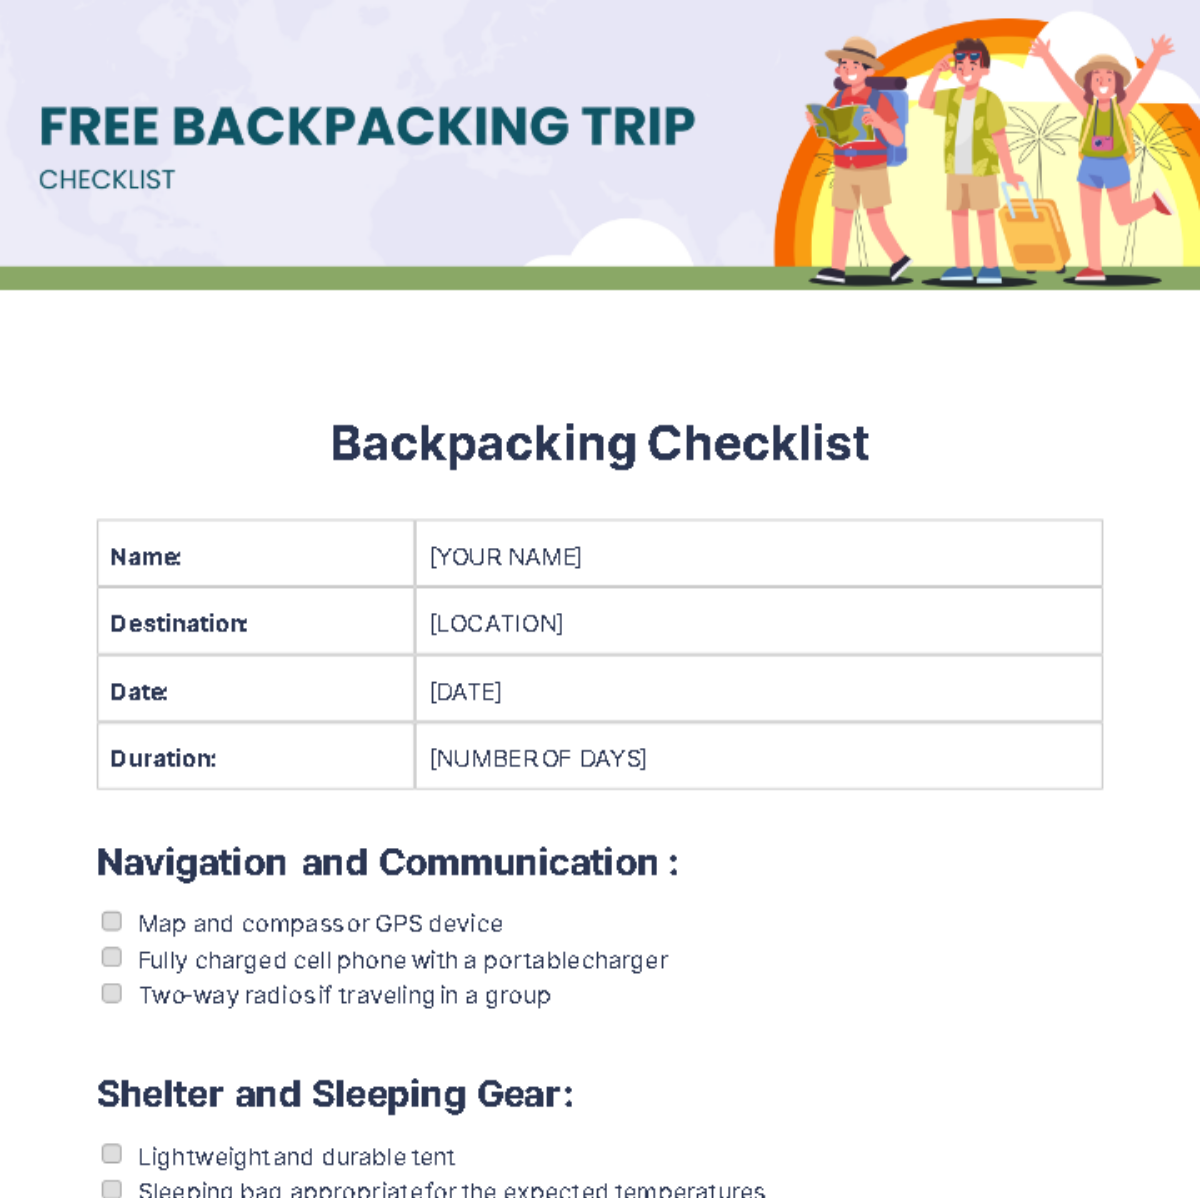 Free Backpacking Trip Checklist Template